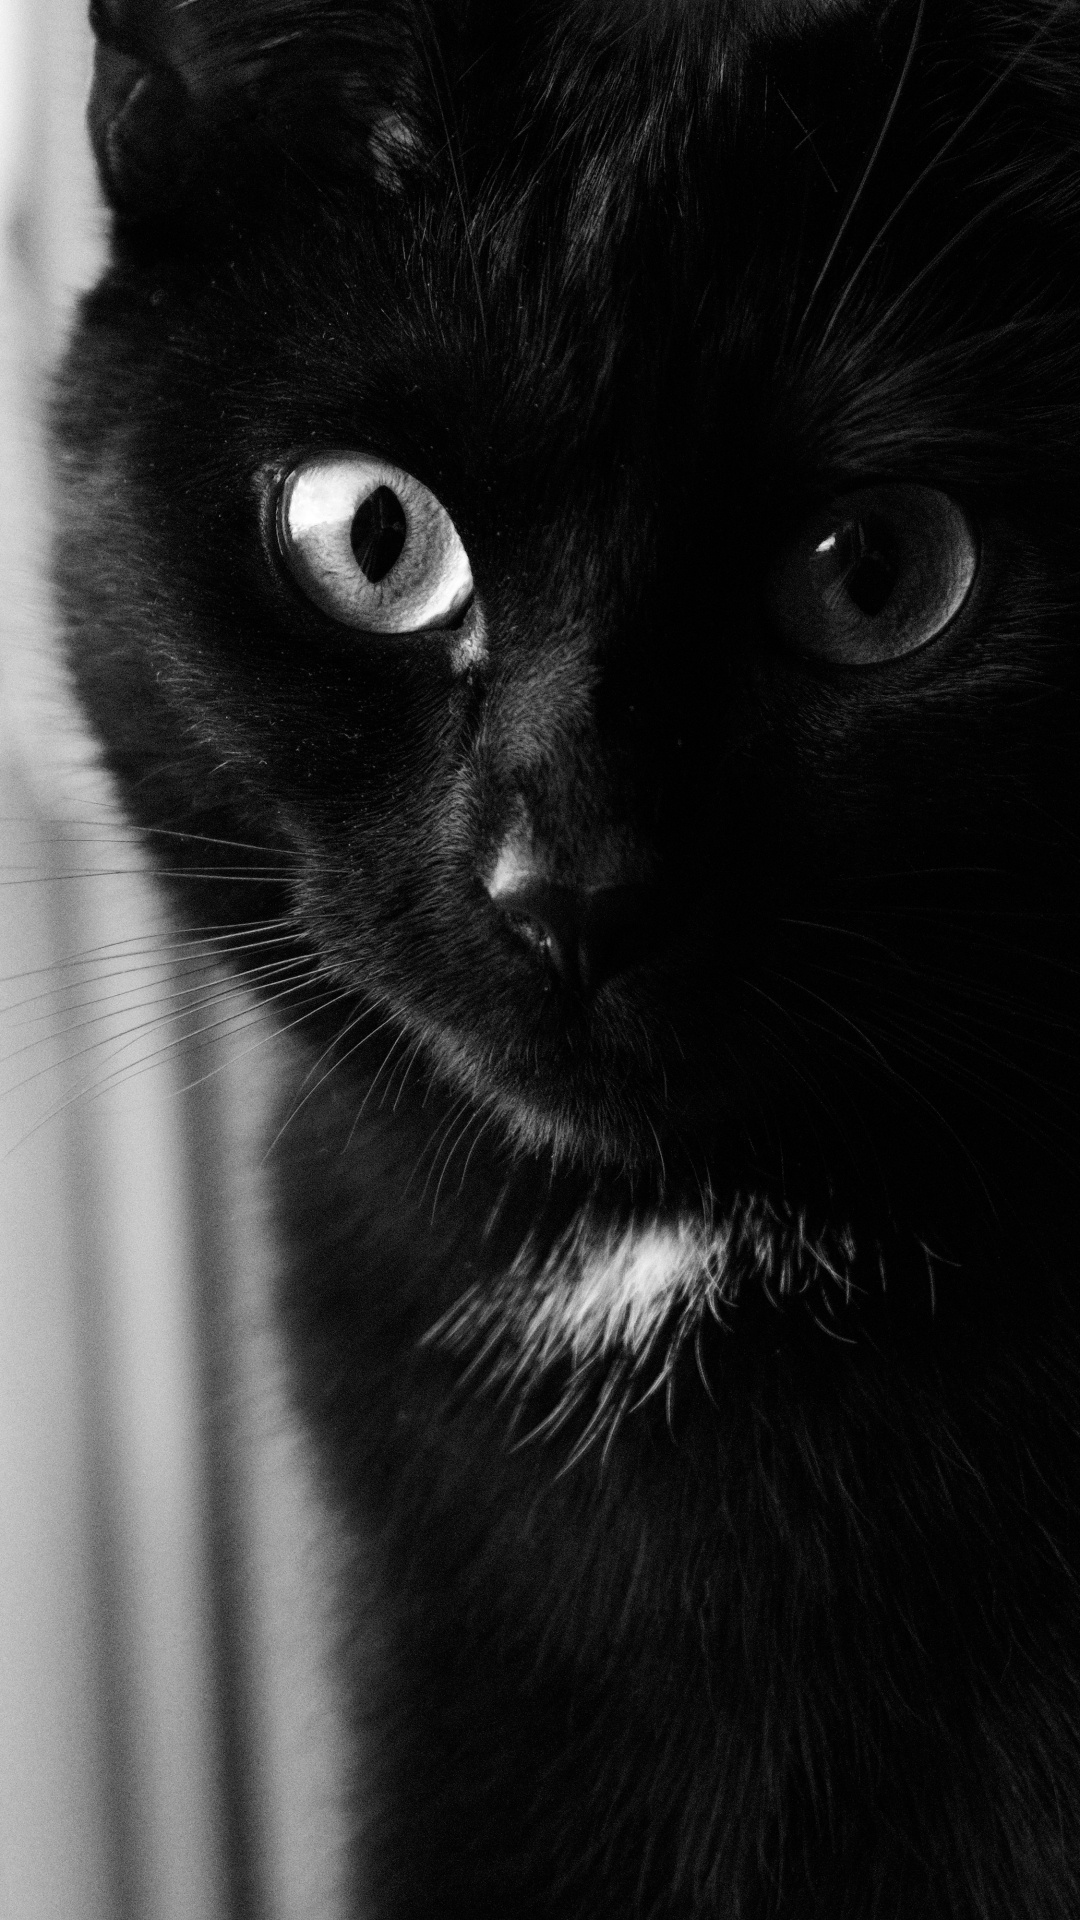 Black Cat in Grayscale Photography. Wallpaper in 1080x1920 Resolution